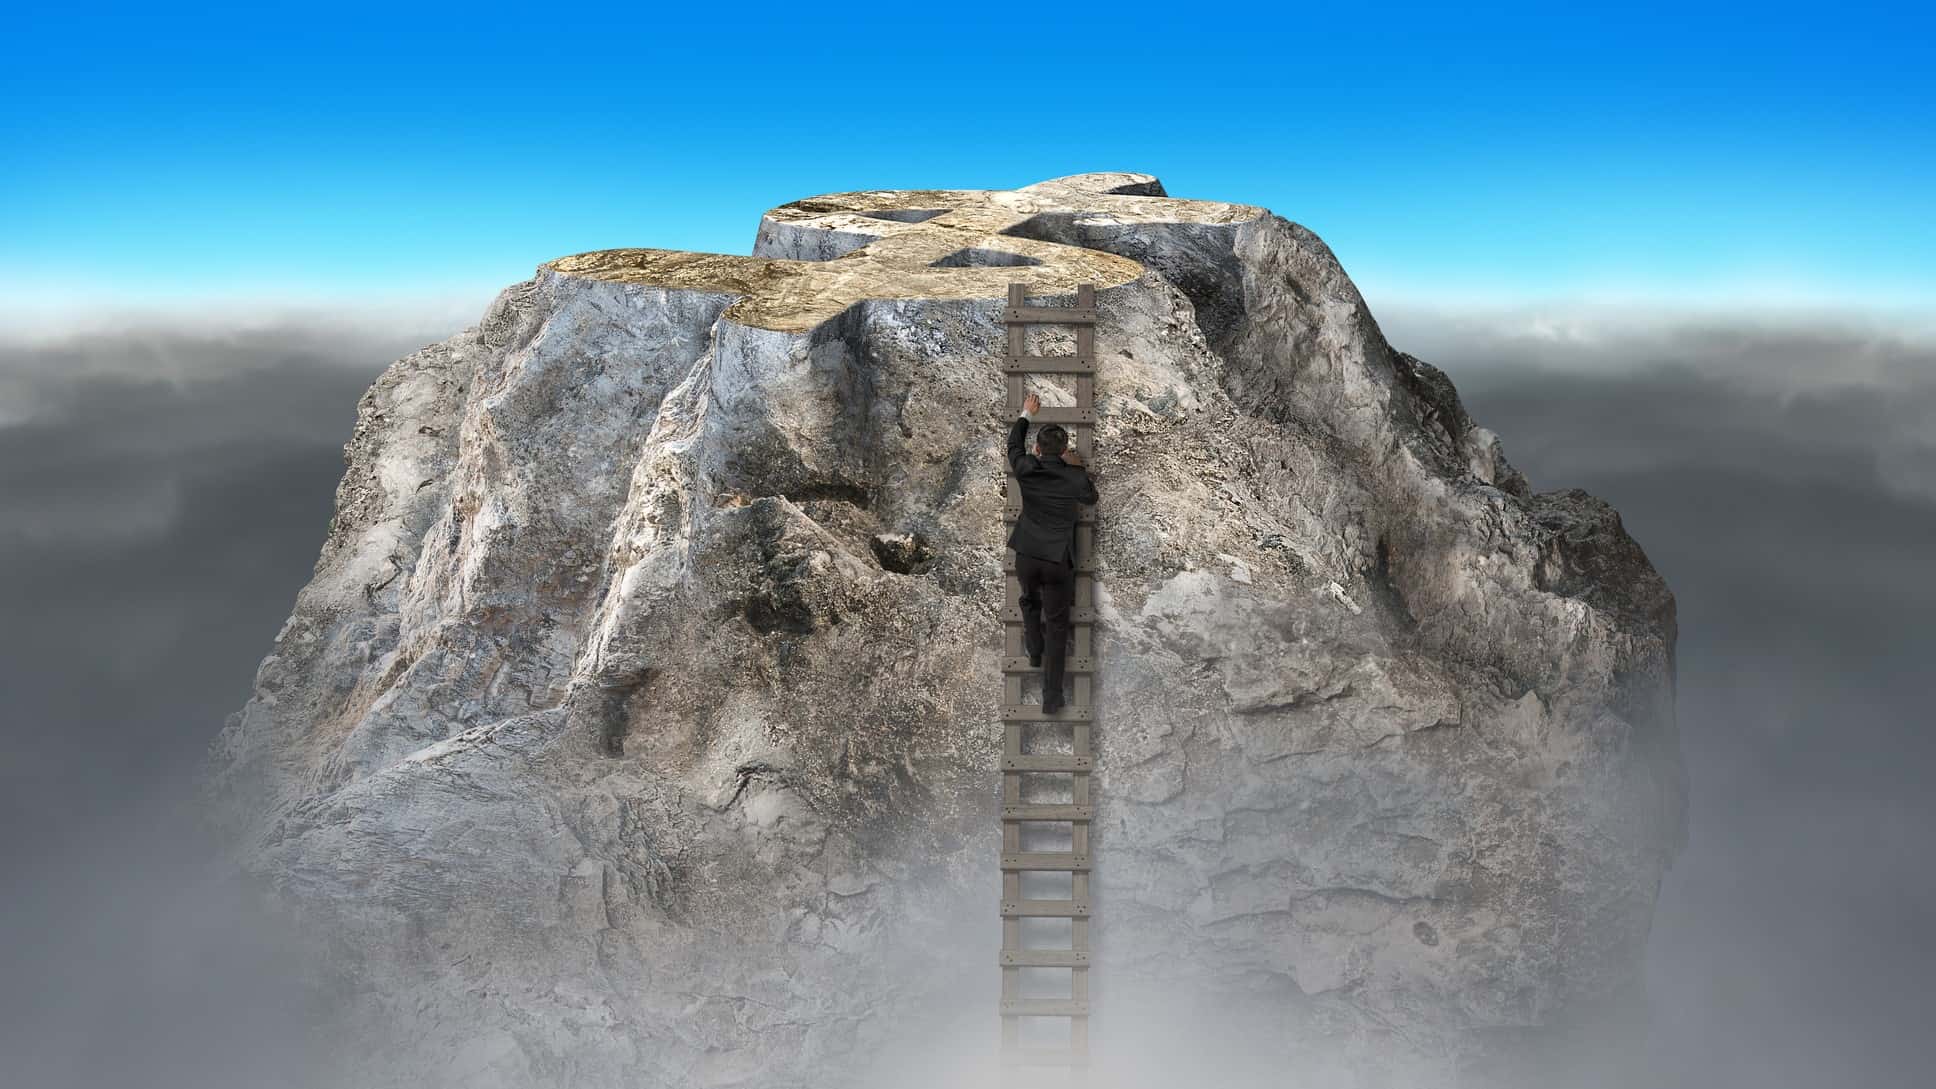 a man in a business suit climbs on a ladder near the peak of a mountain shrouded in cloud with the top of the mountain resembling a dollar sign with a blue sky glowing above it.